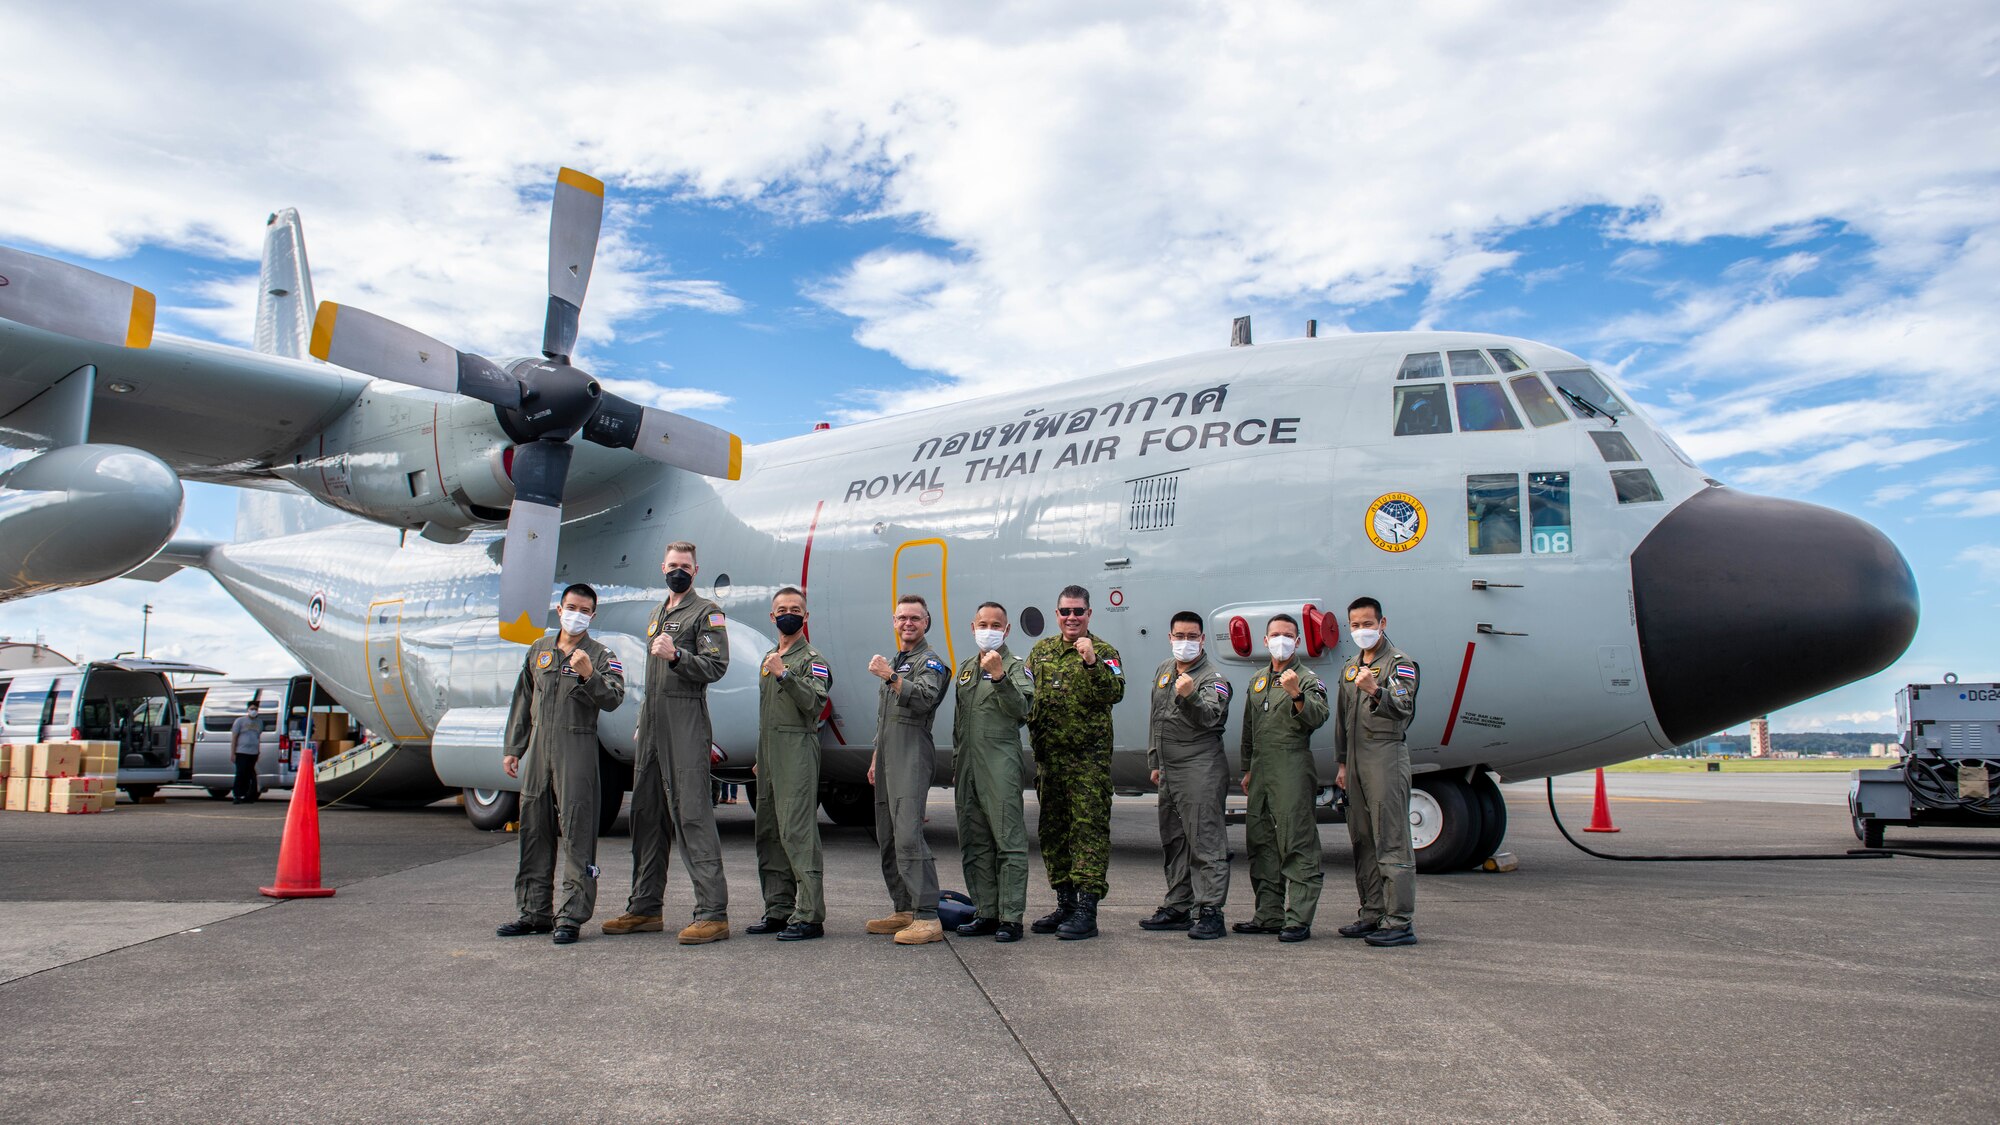 UNC-R and RTAF representatives pose for a group photo